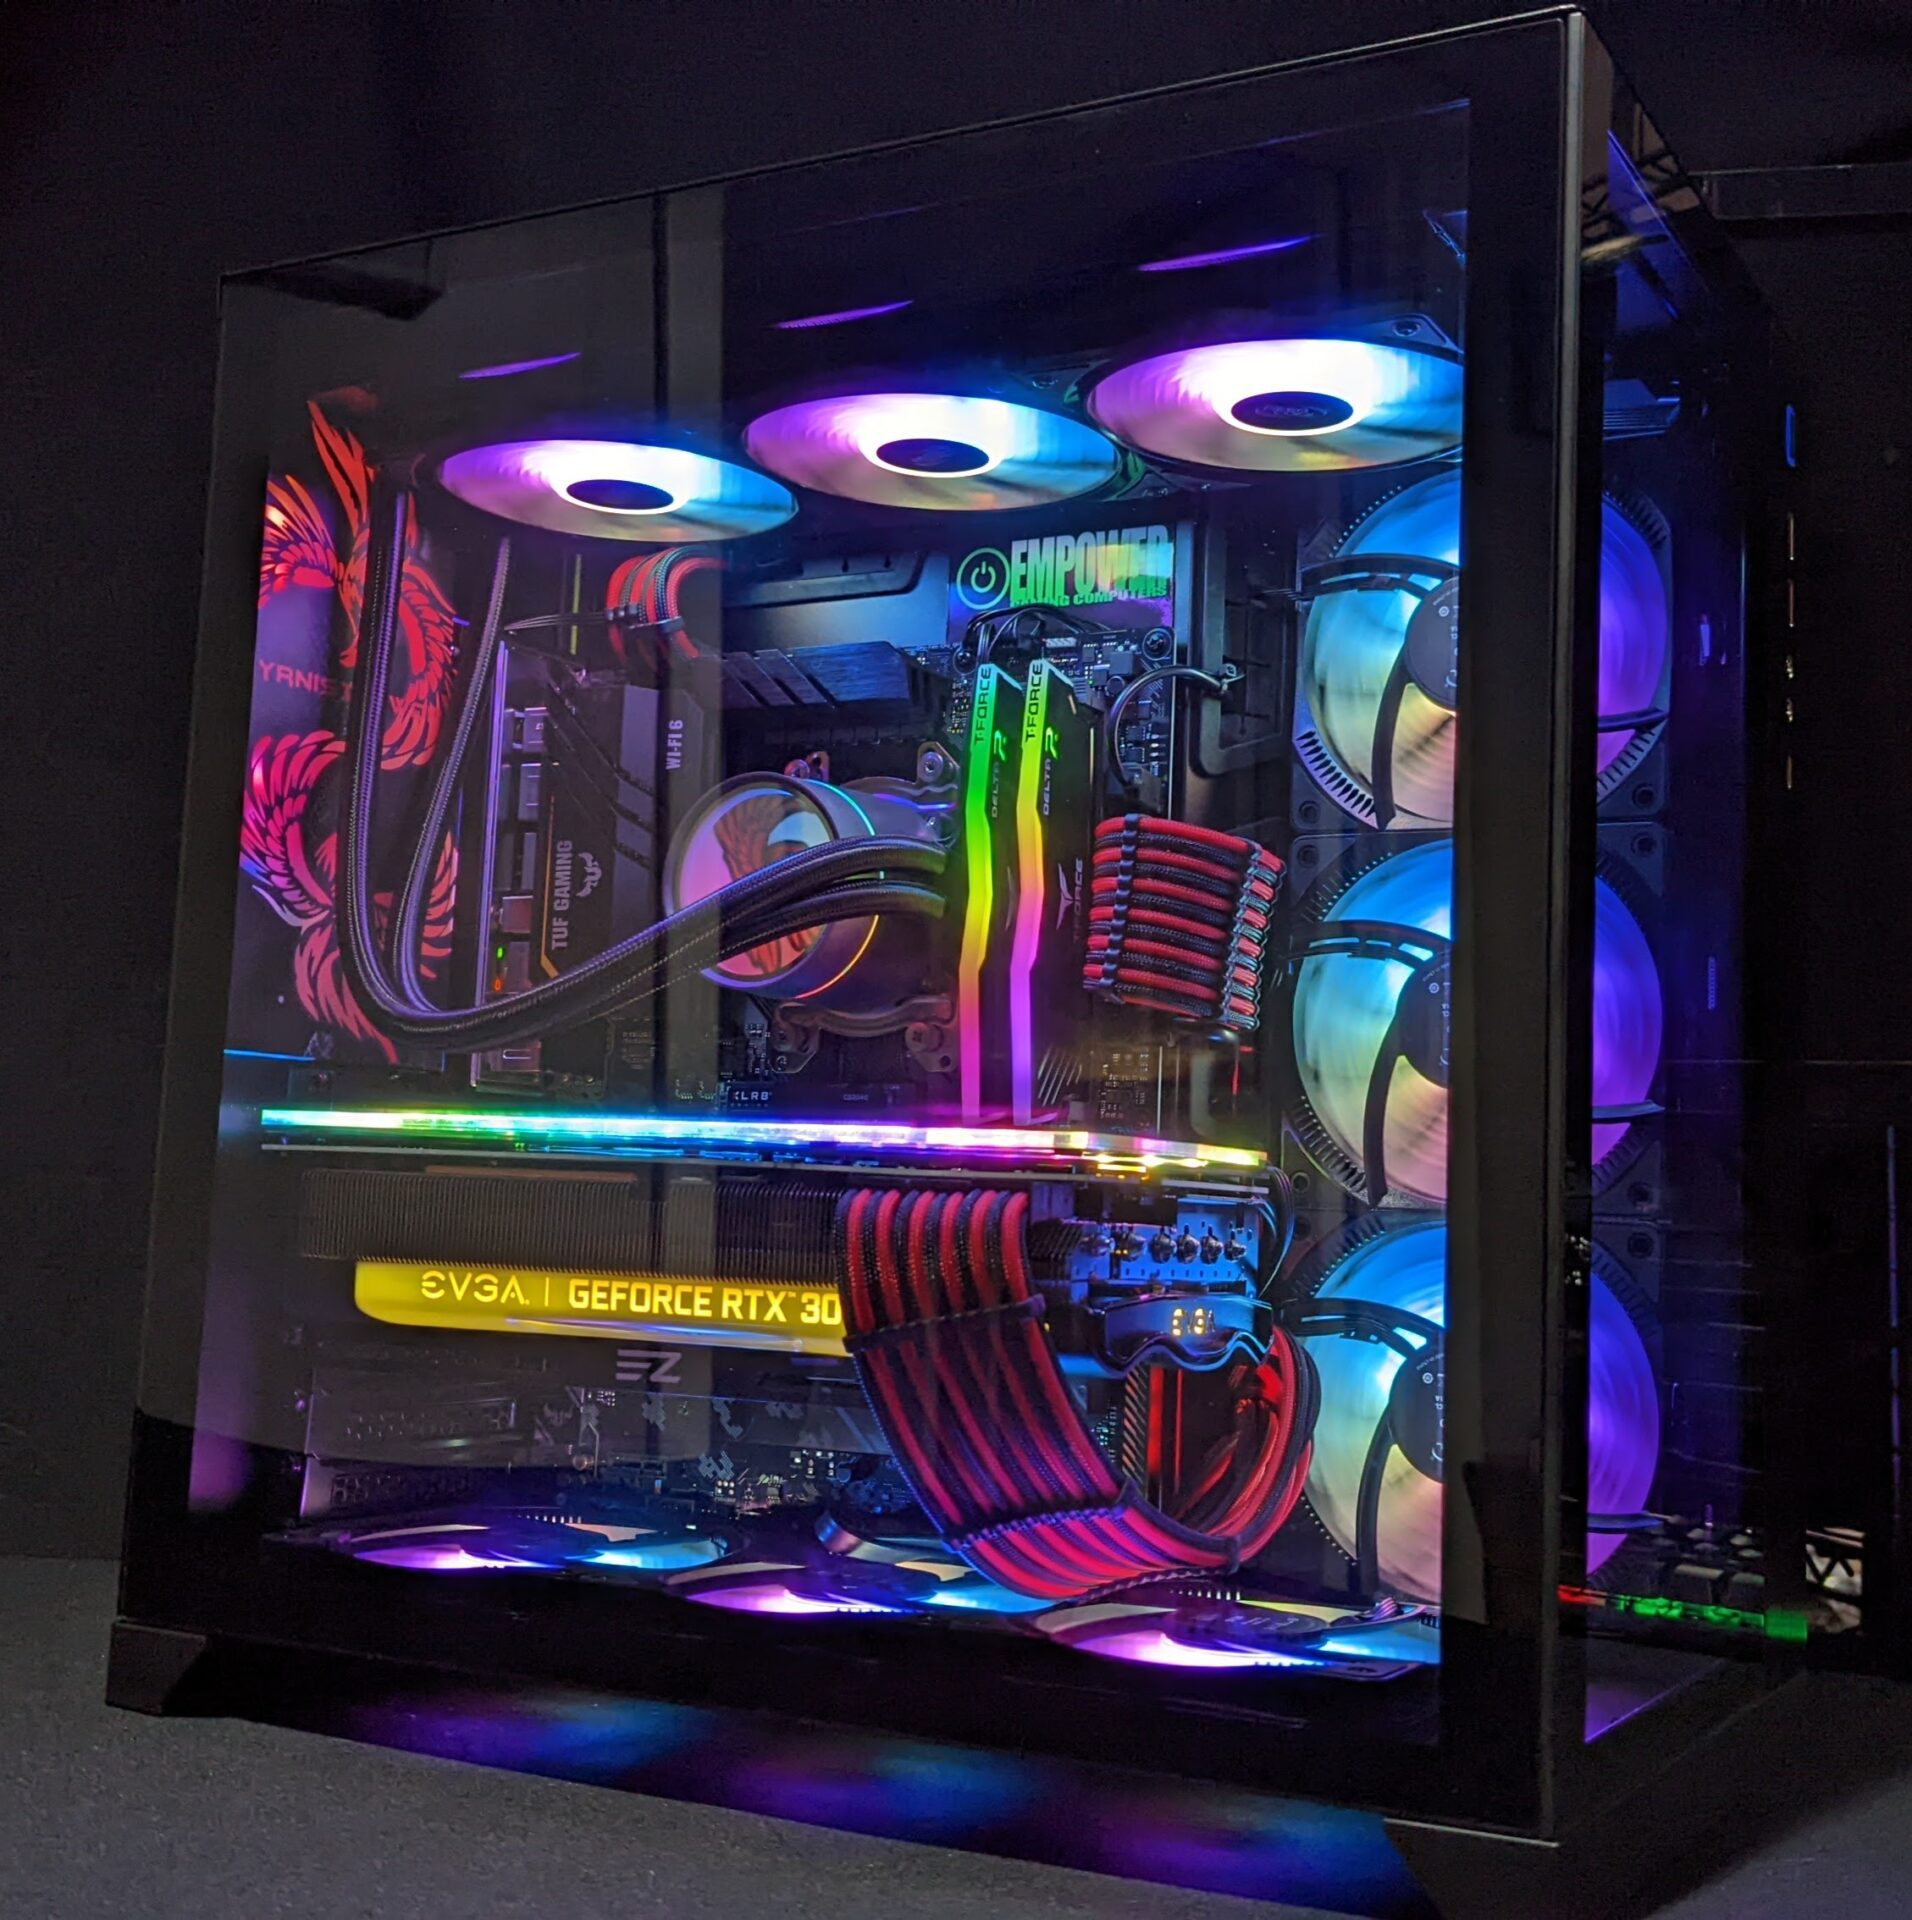 Cpu with colourful lights